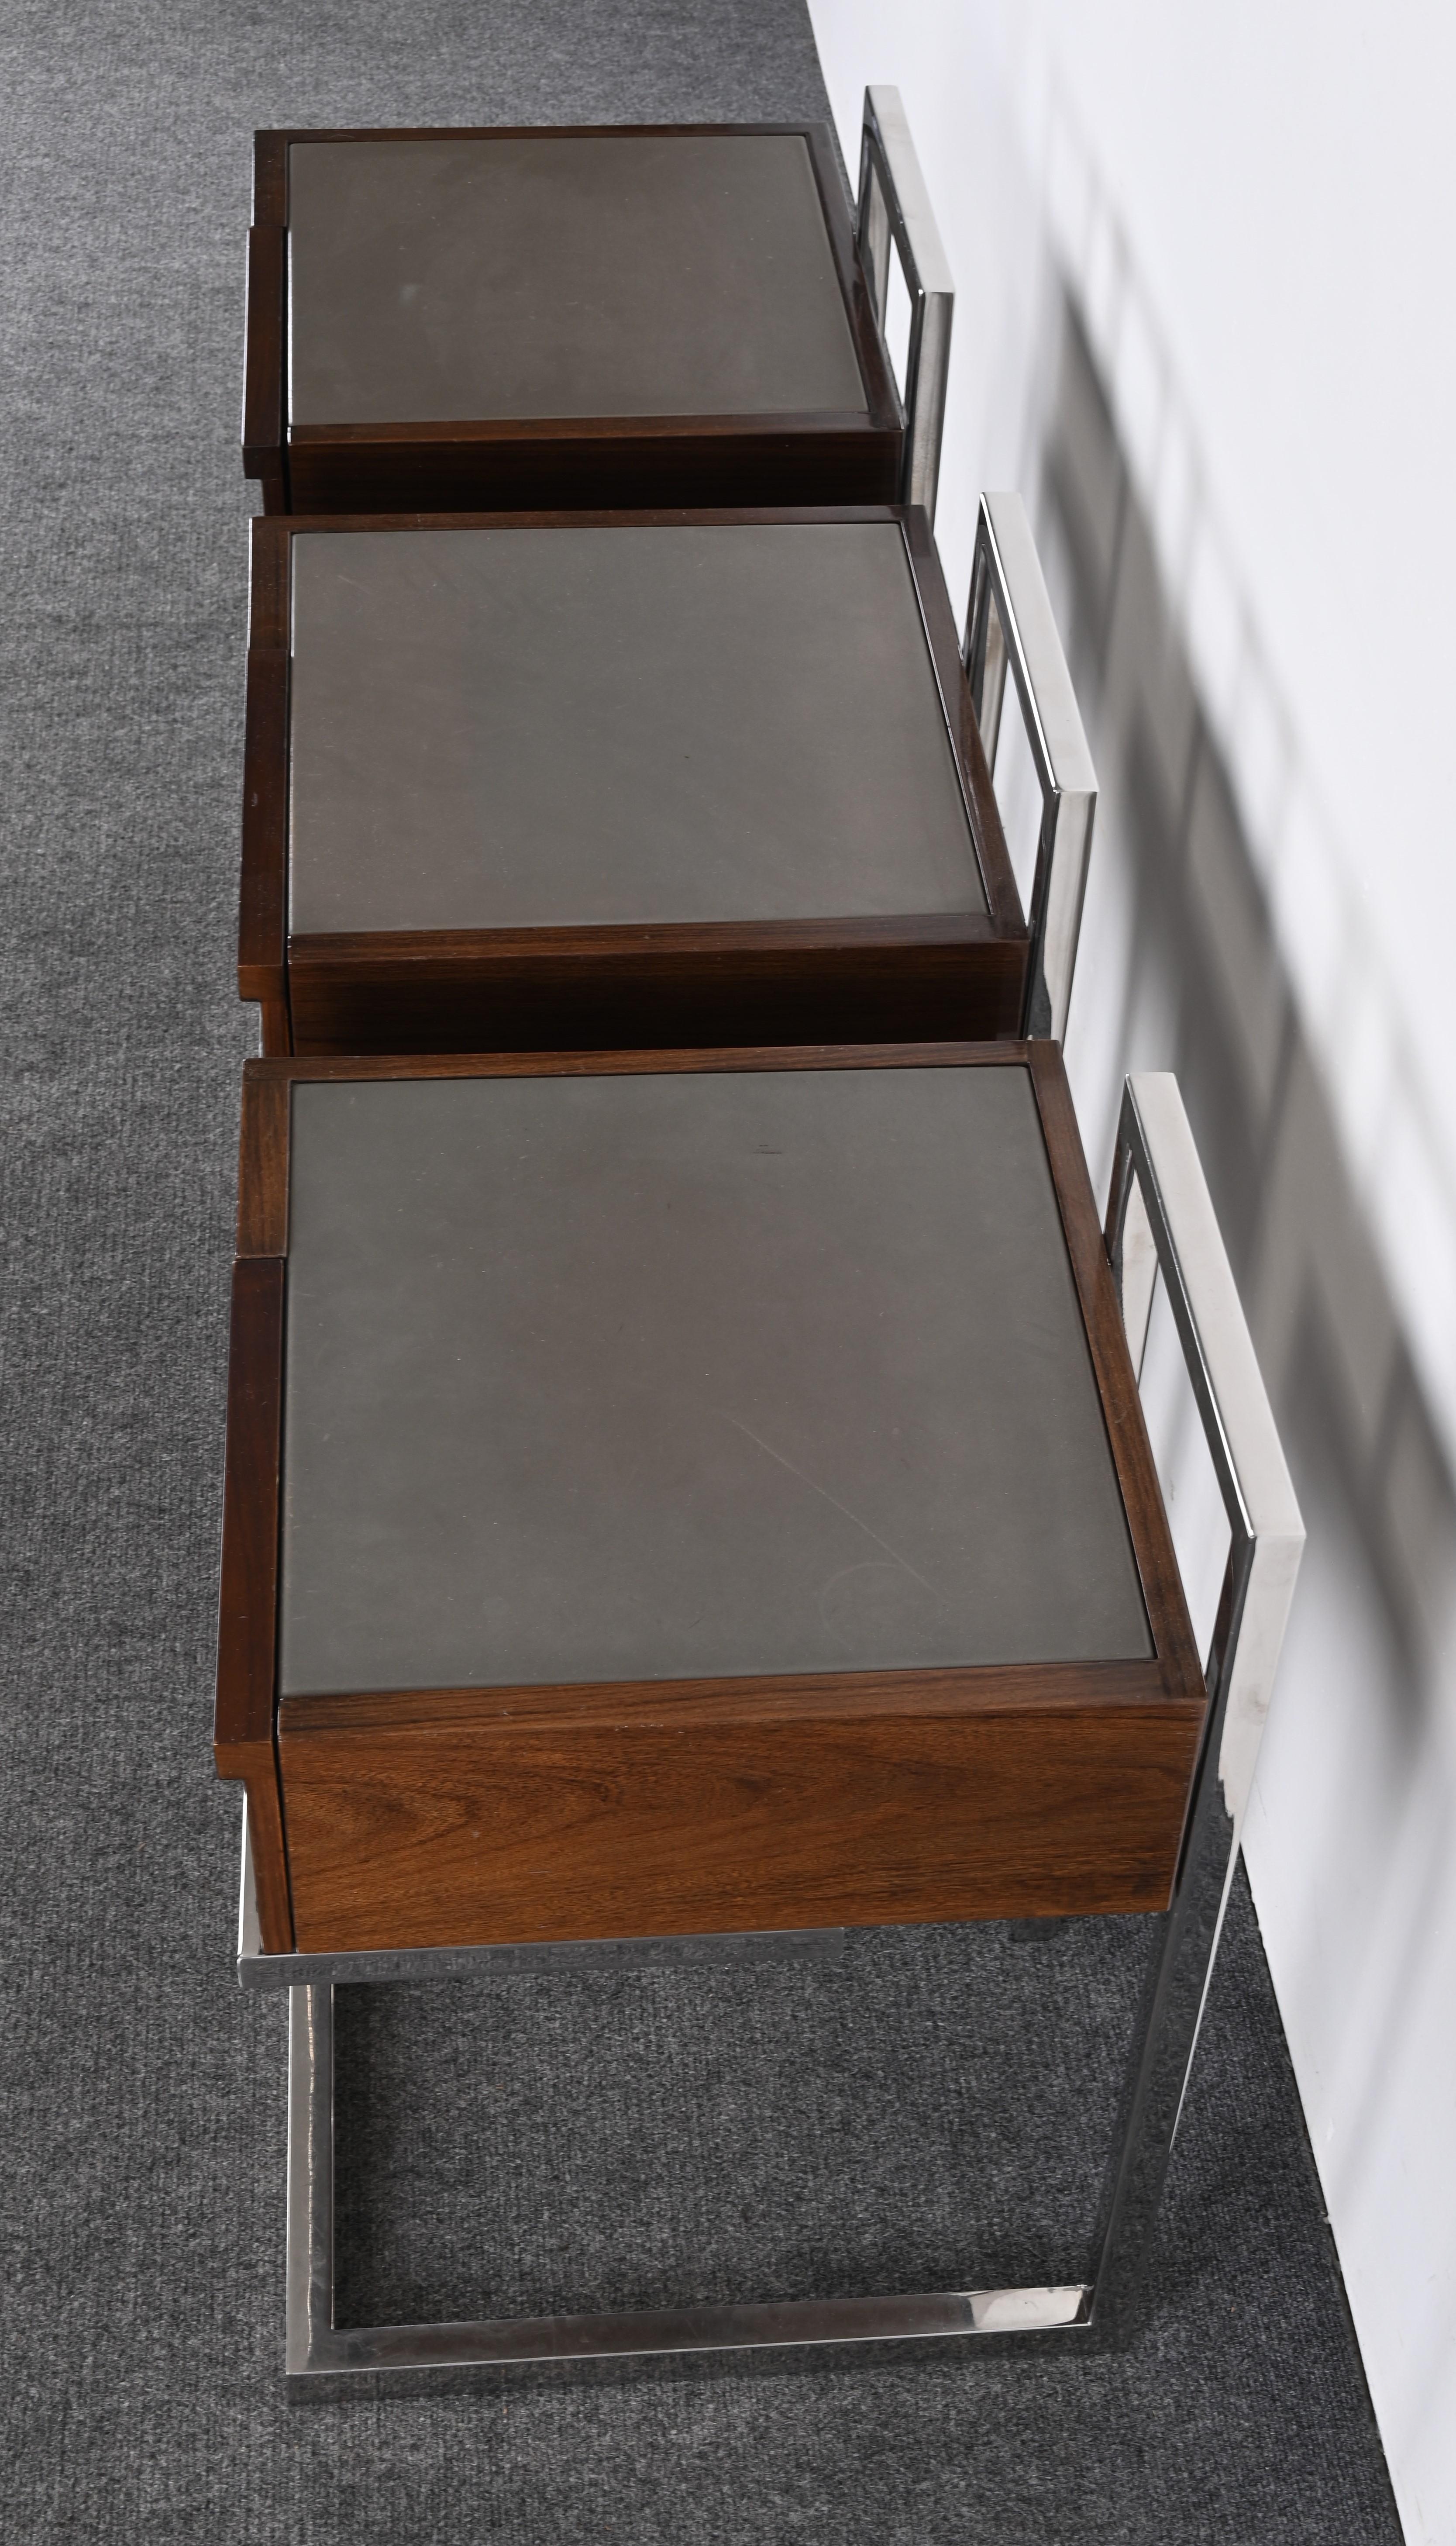 Lacquered Walnut and Stainless Steel End Tables by Vladimir Kagan for Gucci For Sale 3